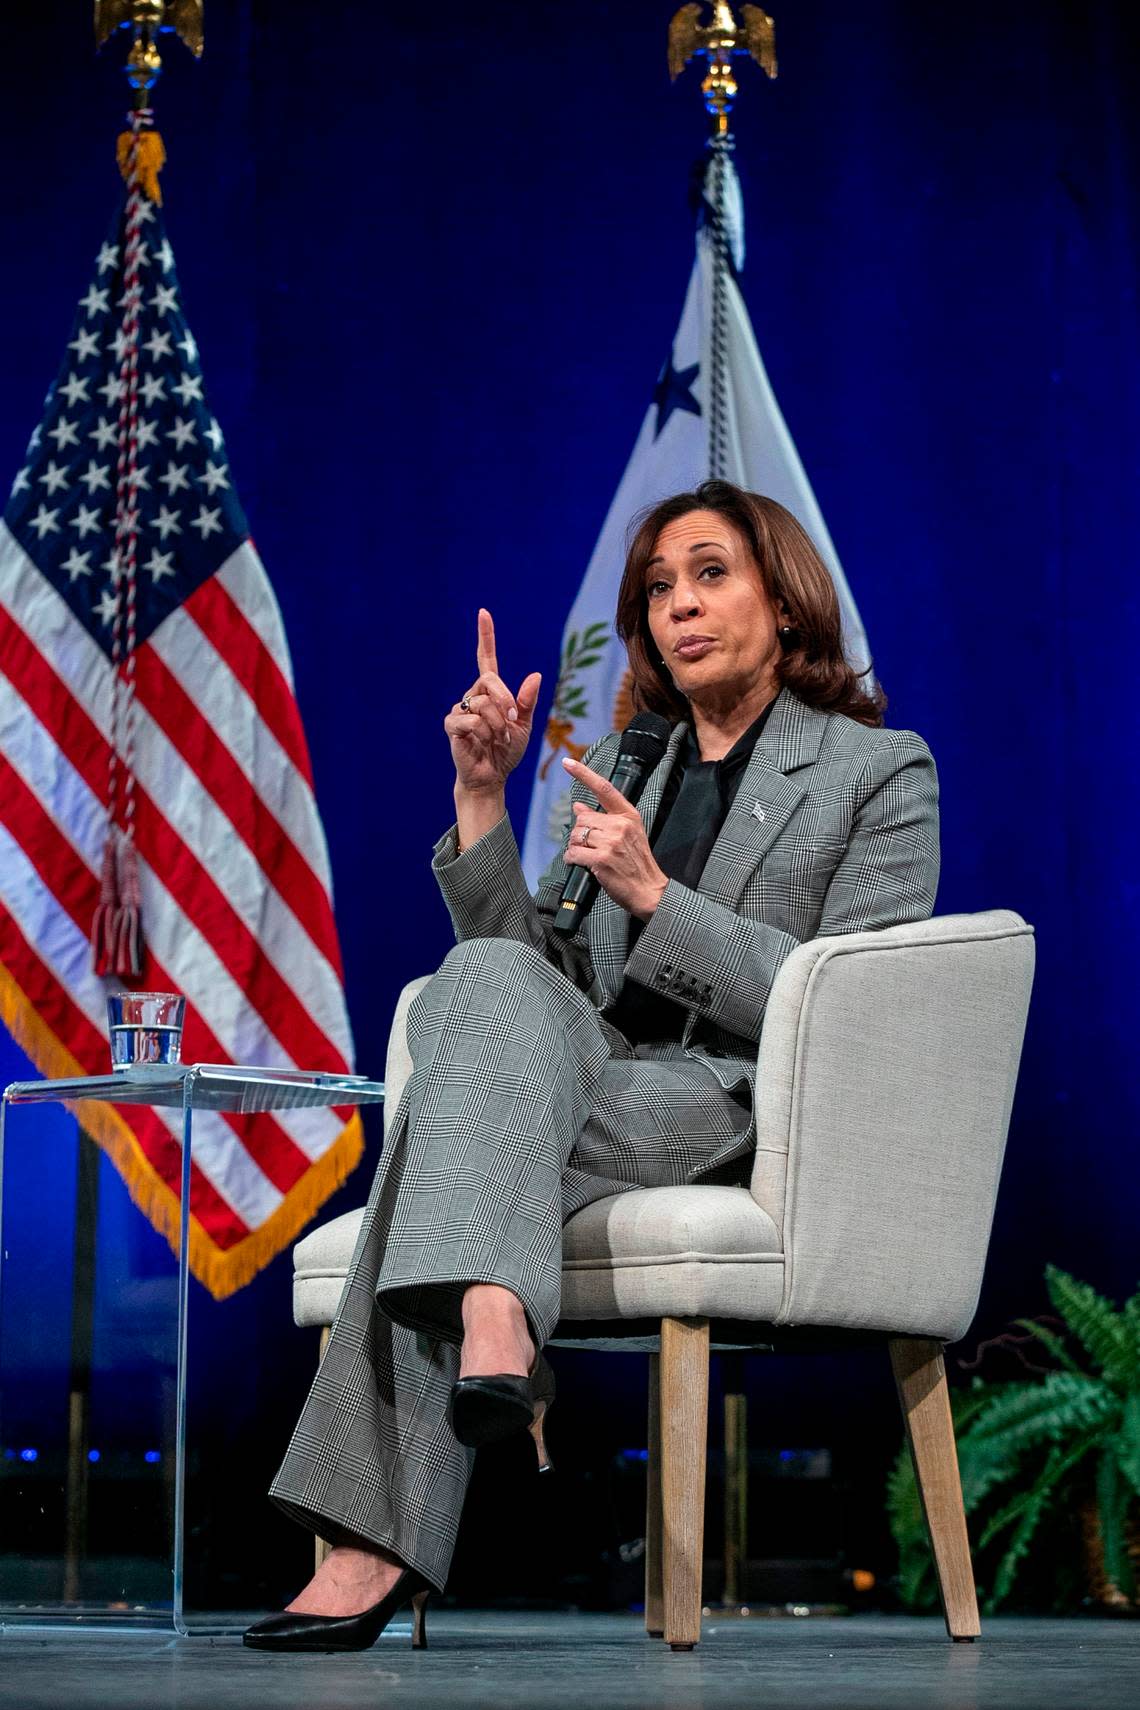 Vice President Kamala Harris speaks during a discussion on community development and small business in the Fletcher Theatre at the Duke Energy Performing Arts Center on Monday, January 30, 2023 in Raleigh, N.C.